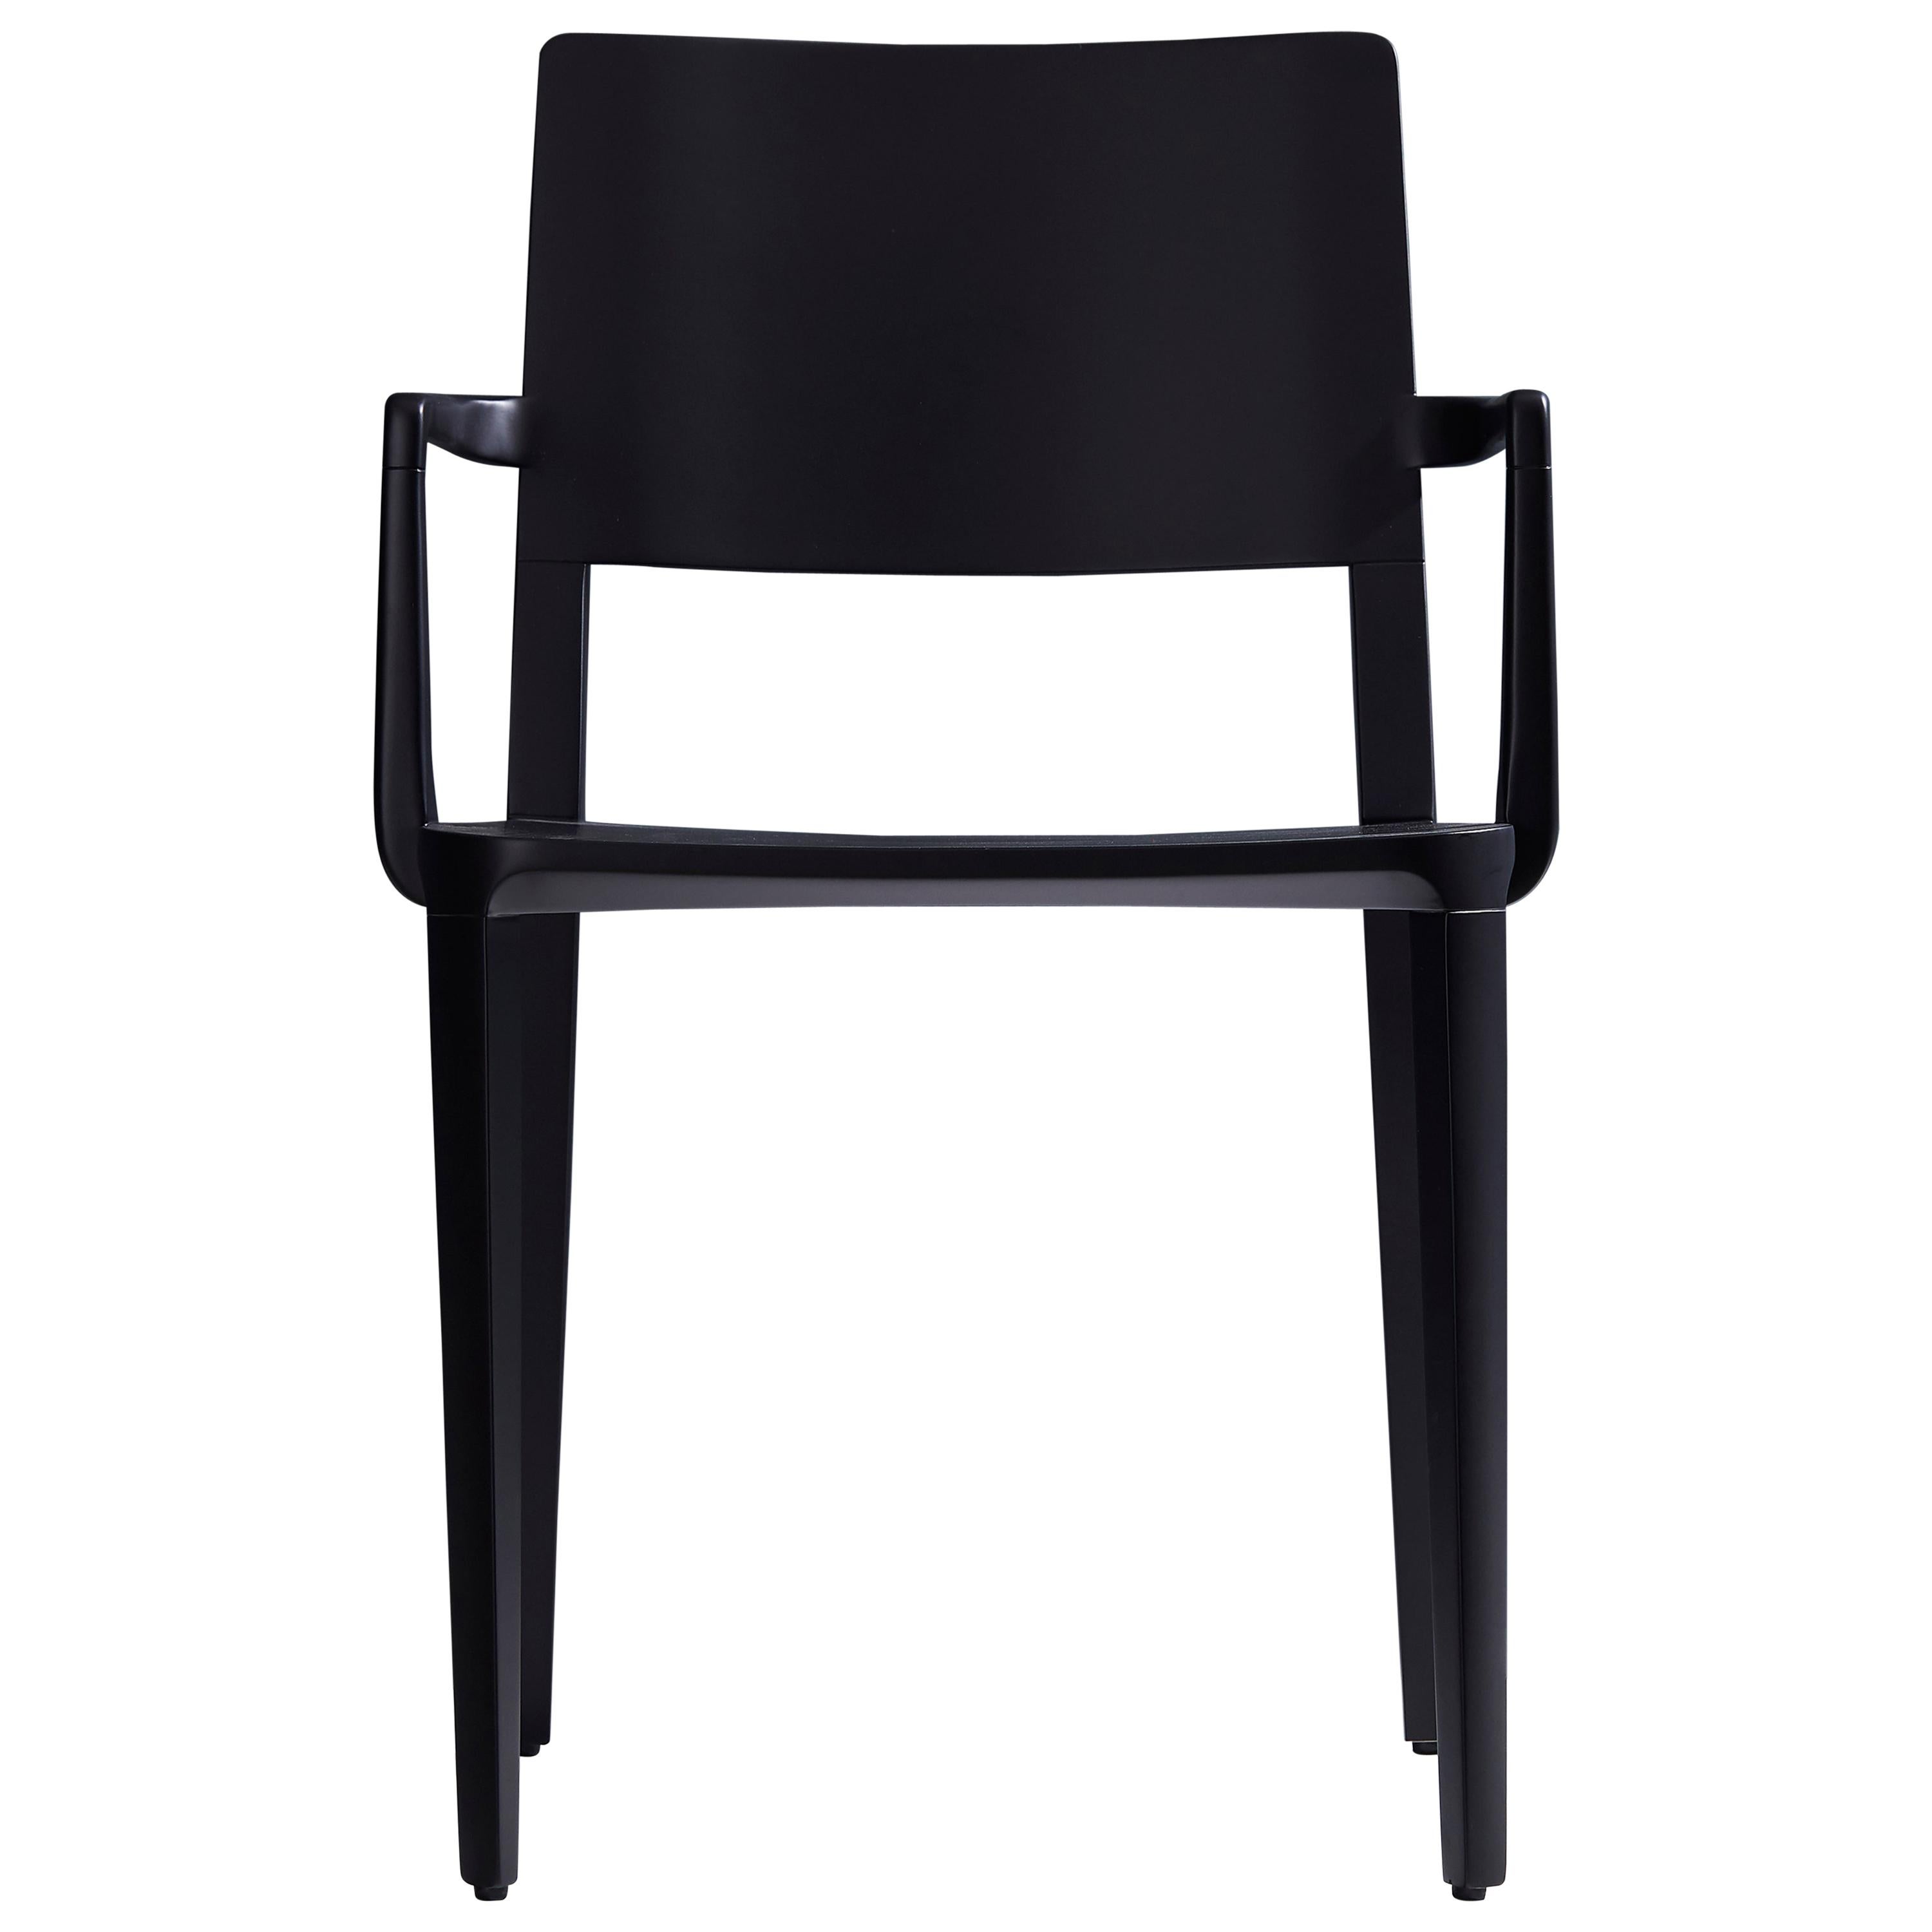 Minimalist Modern Chair in Solid Wood Black Finish with Arms